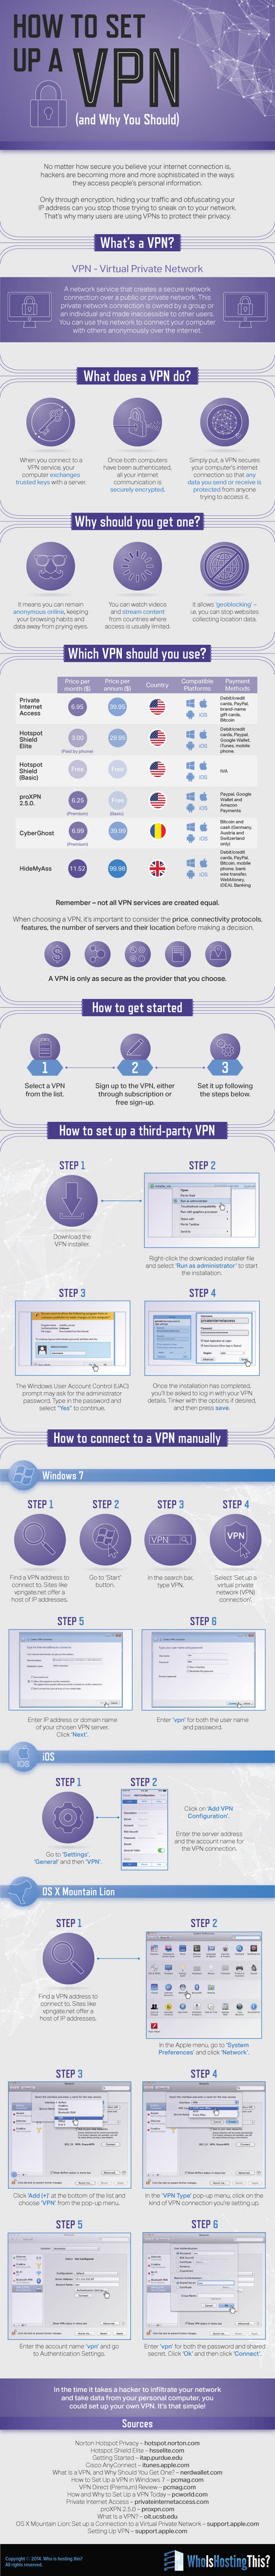 How-to-set-up-a-VPN